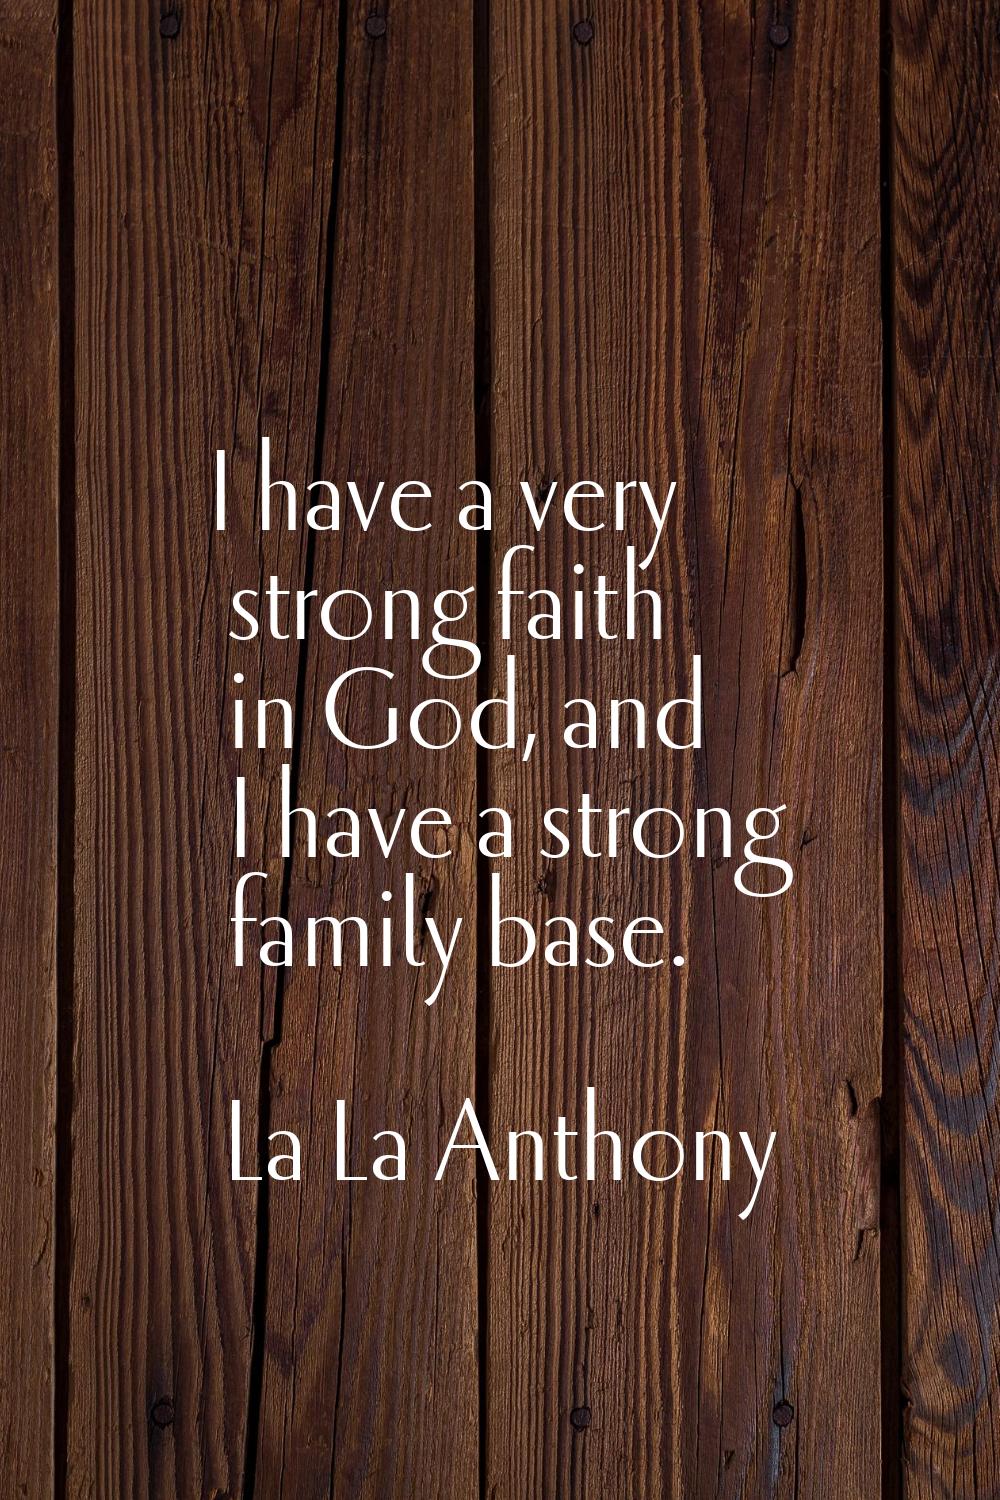 I have a very strong faith in God, and I have a strong family base.